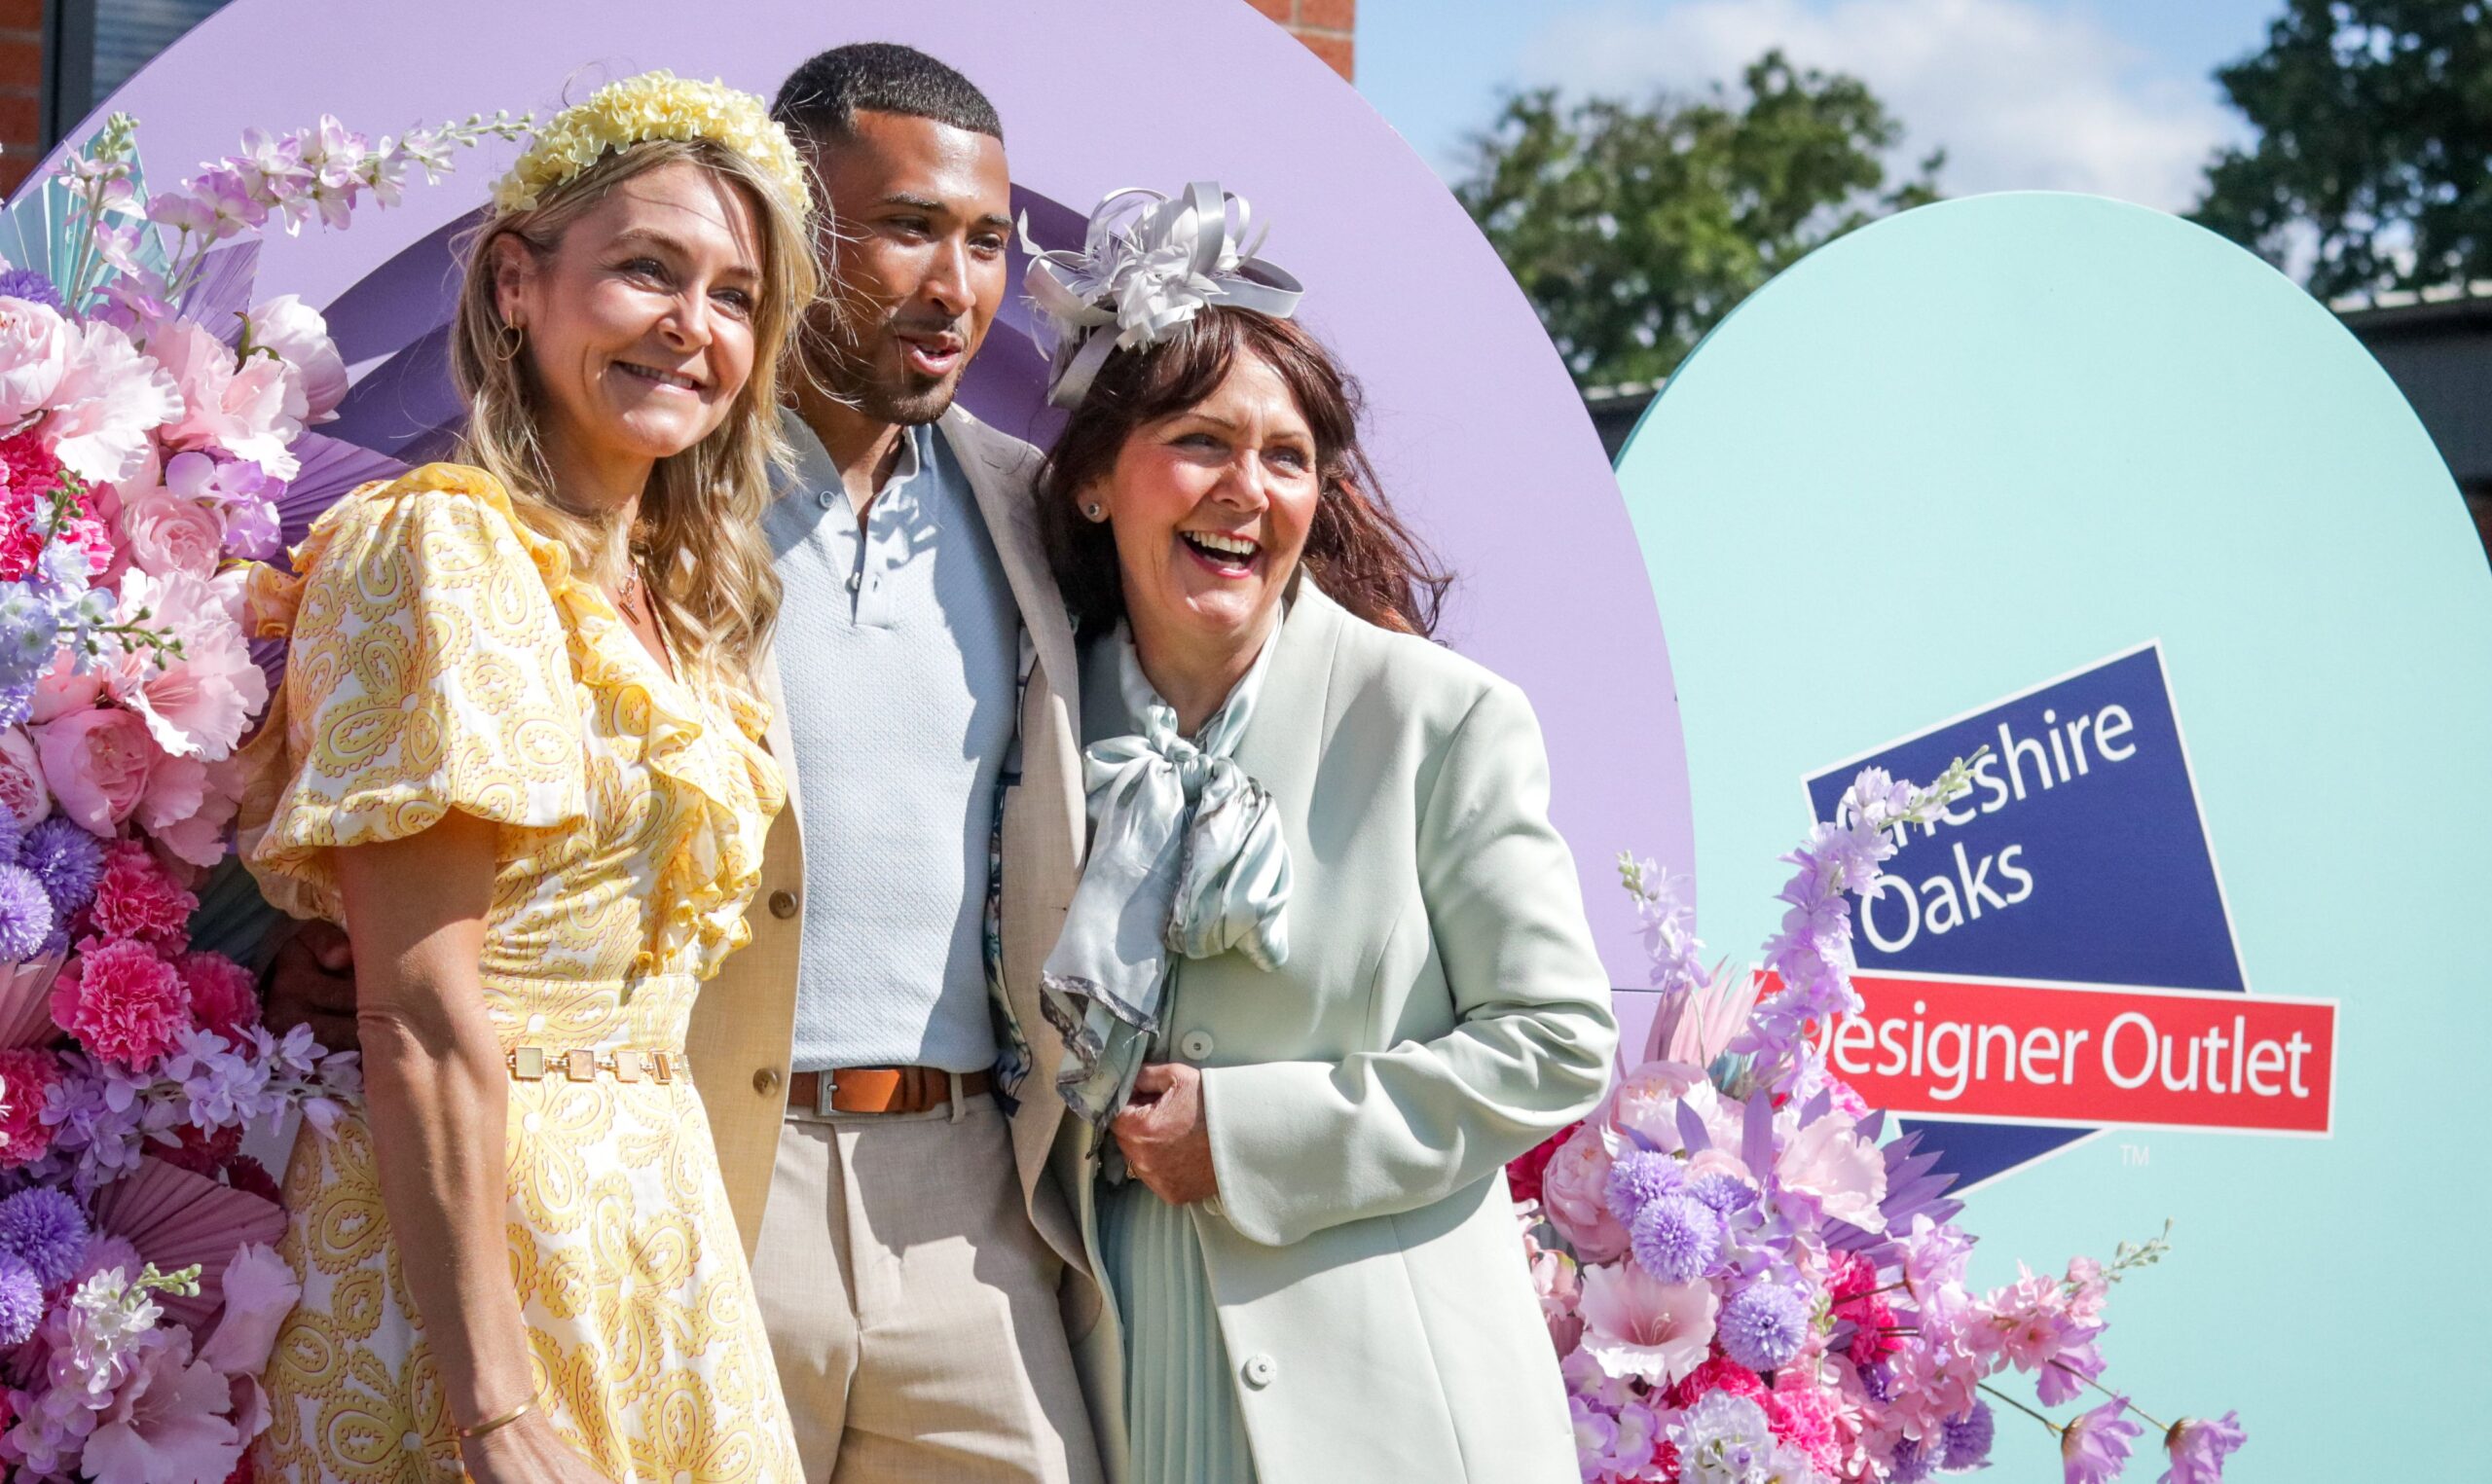 Fabulous Fashions Rewarded at Ladies Day in Partnership with Cheshire Oaks Designer Outlet thumbnail image